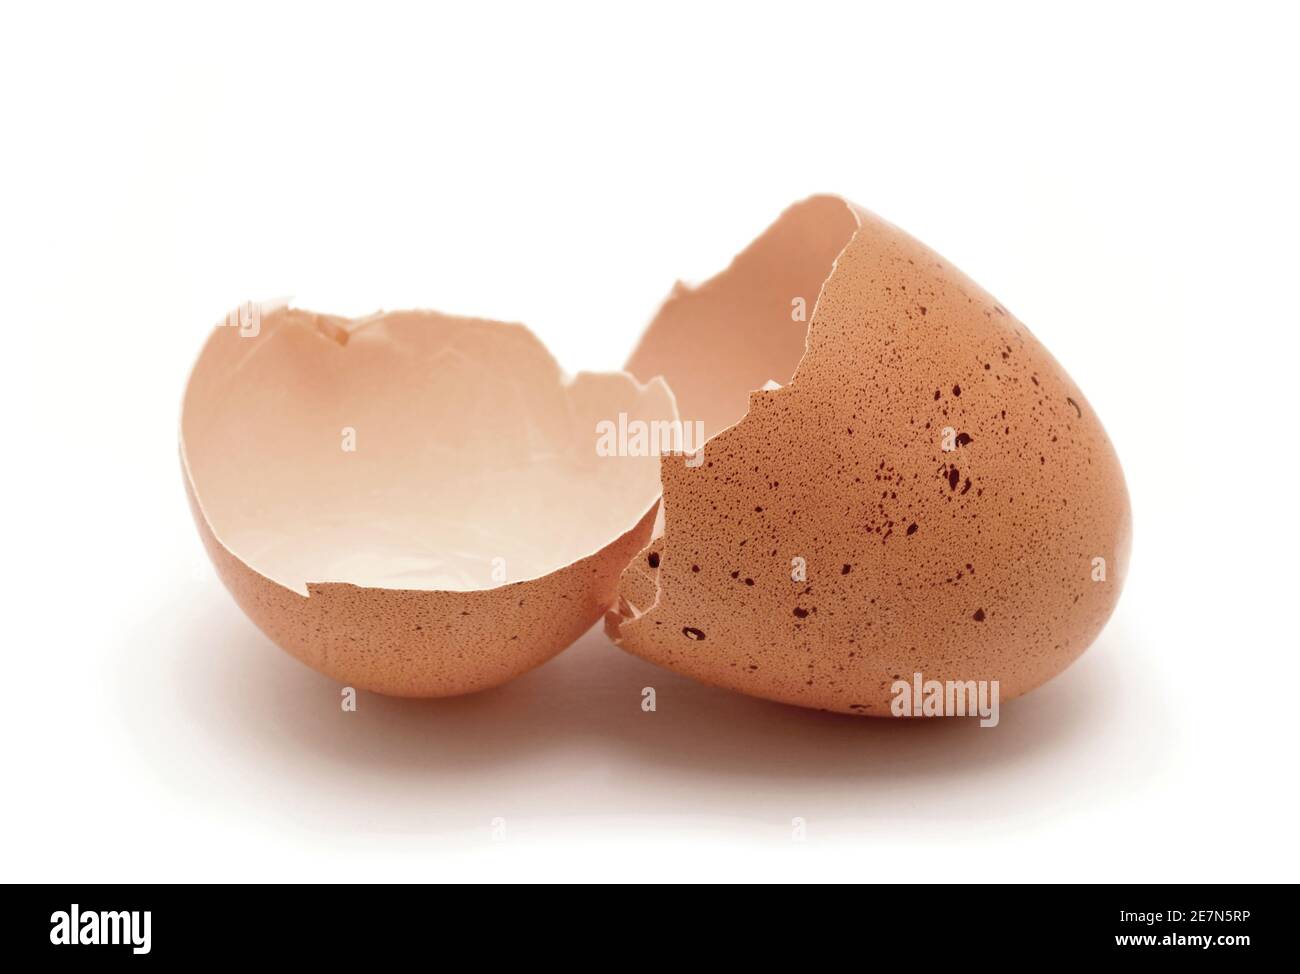 Brown Broken Chocolate Egg Cracked Shell Two Halves Stock